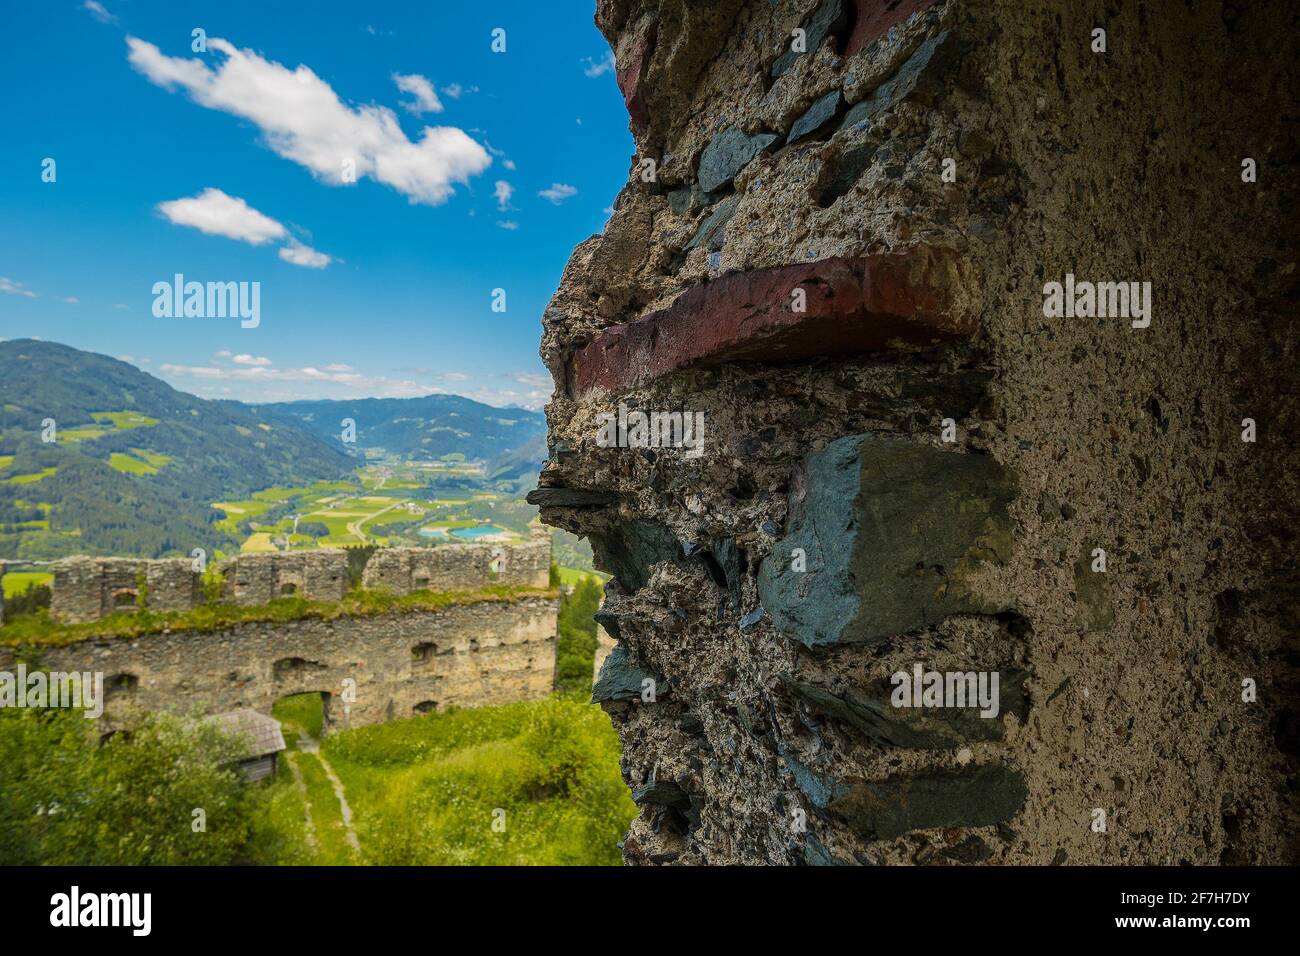 Detgail of Steinschloss castle ruins wall, rising above the mura valley in styria, Austria. Medieval ruins in Austria on a sunny day. Stock Photo